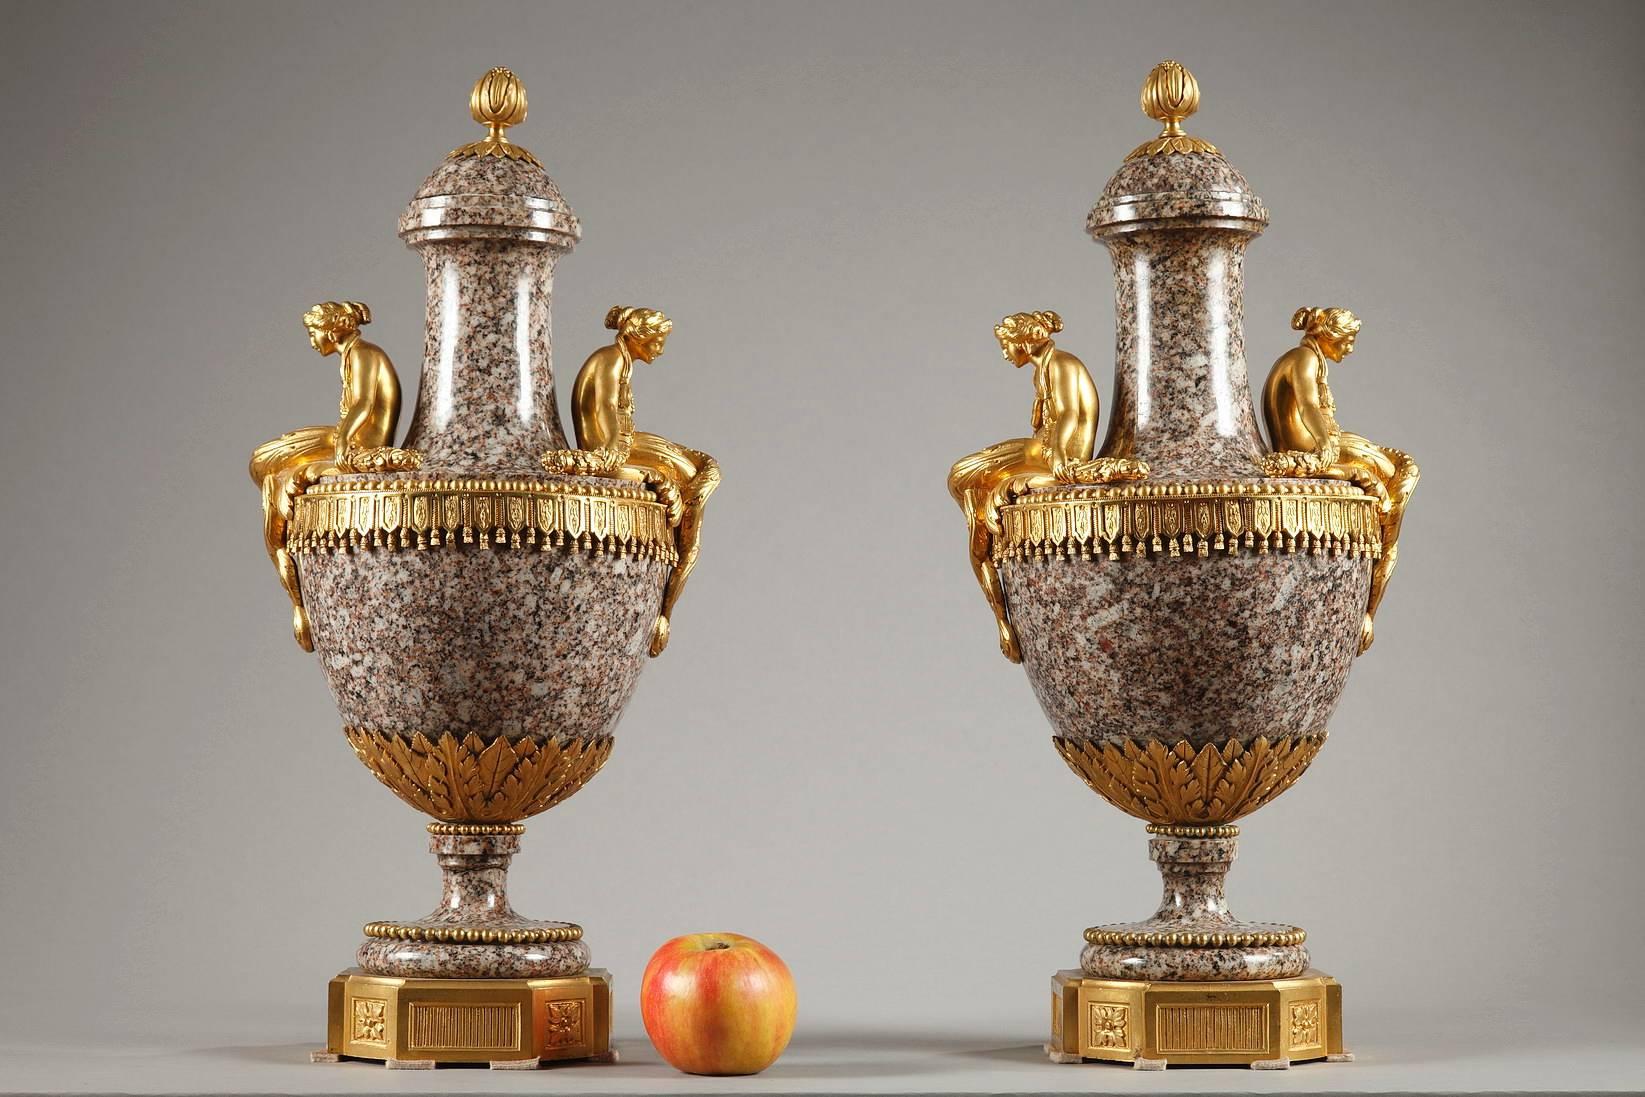 Pair of Ural granite and gilt bronze ornamental vases in Louis XVI style. Young women in gilt bronze sit on the shoulders of the granite vases to form the handles, their backs bent slightly forward under the weight of the garlands they are wearing